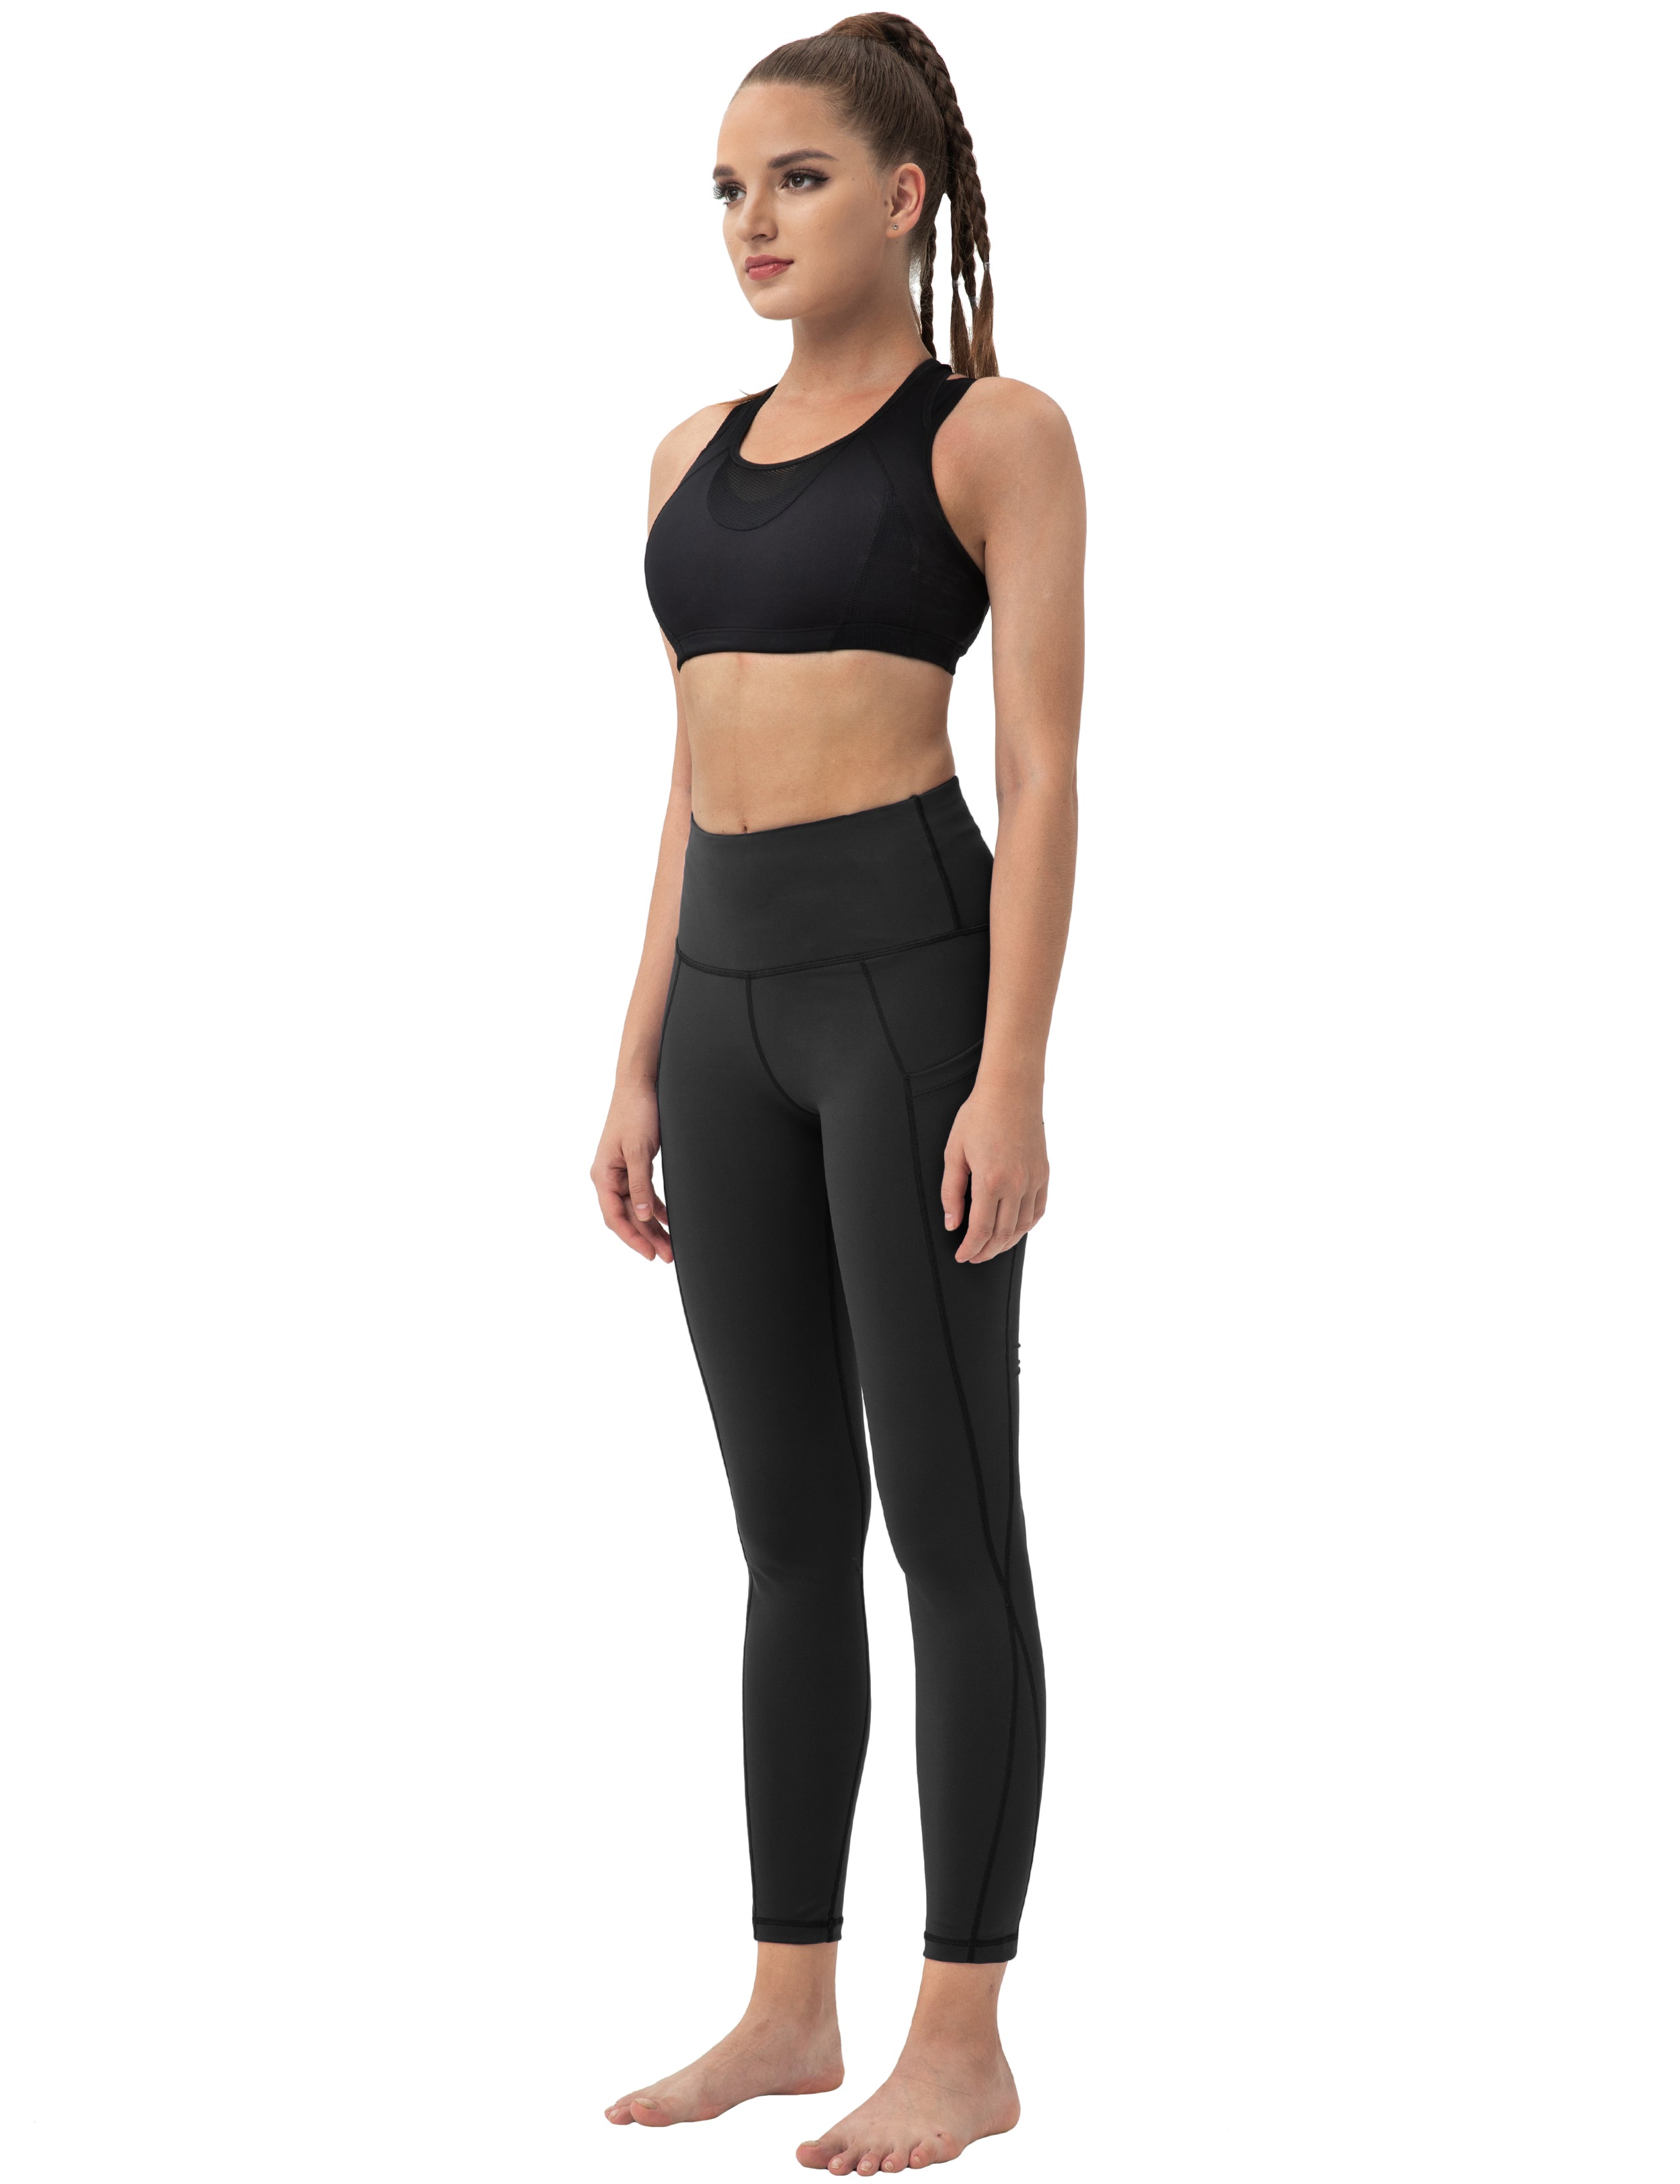 High Waist Side Pockets Pilates Pants black 75% Nylon, 25% Spandex Fabric doesn't attract lint easily 4-way stretch No see-through Moisture-wicking Tummy control Inner pocket